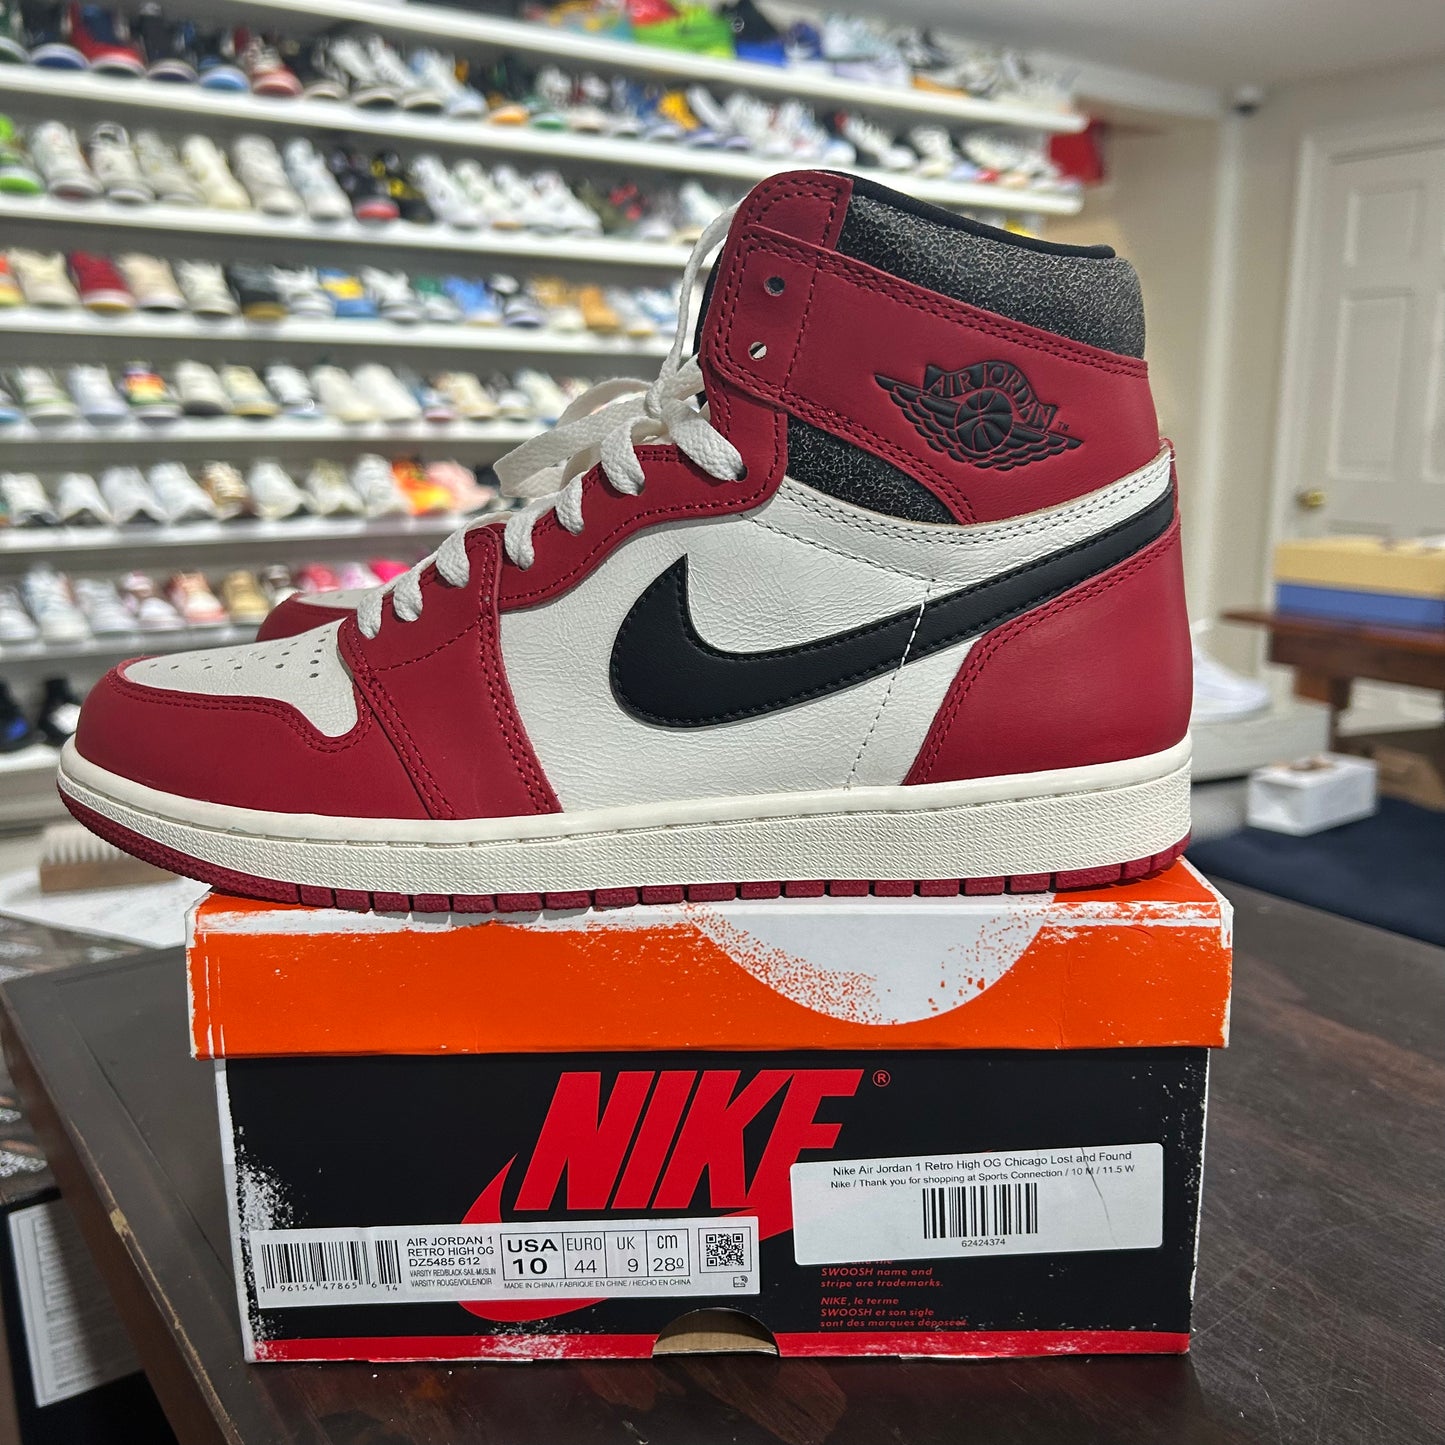 *USED* VNDS Jordan 1 Lost and Found (Size 10)